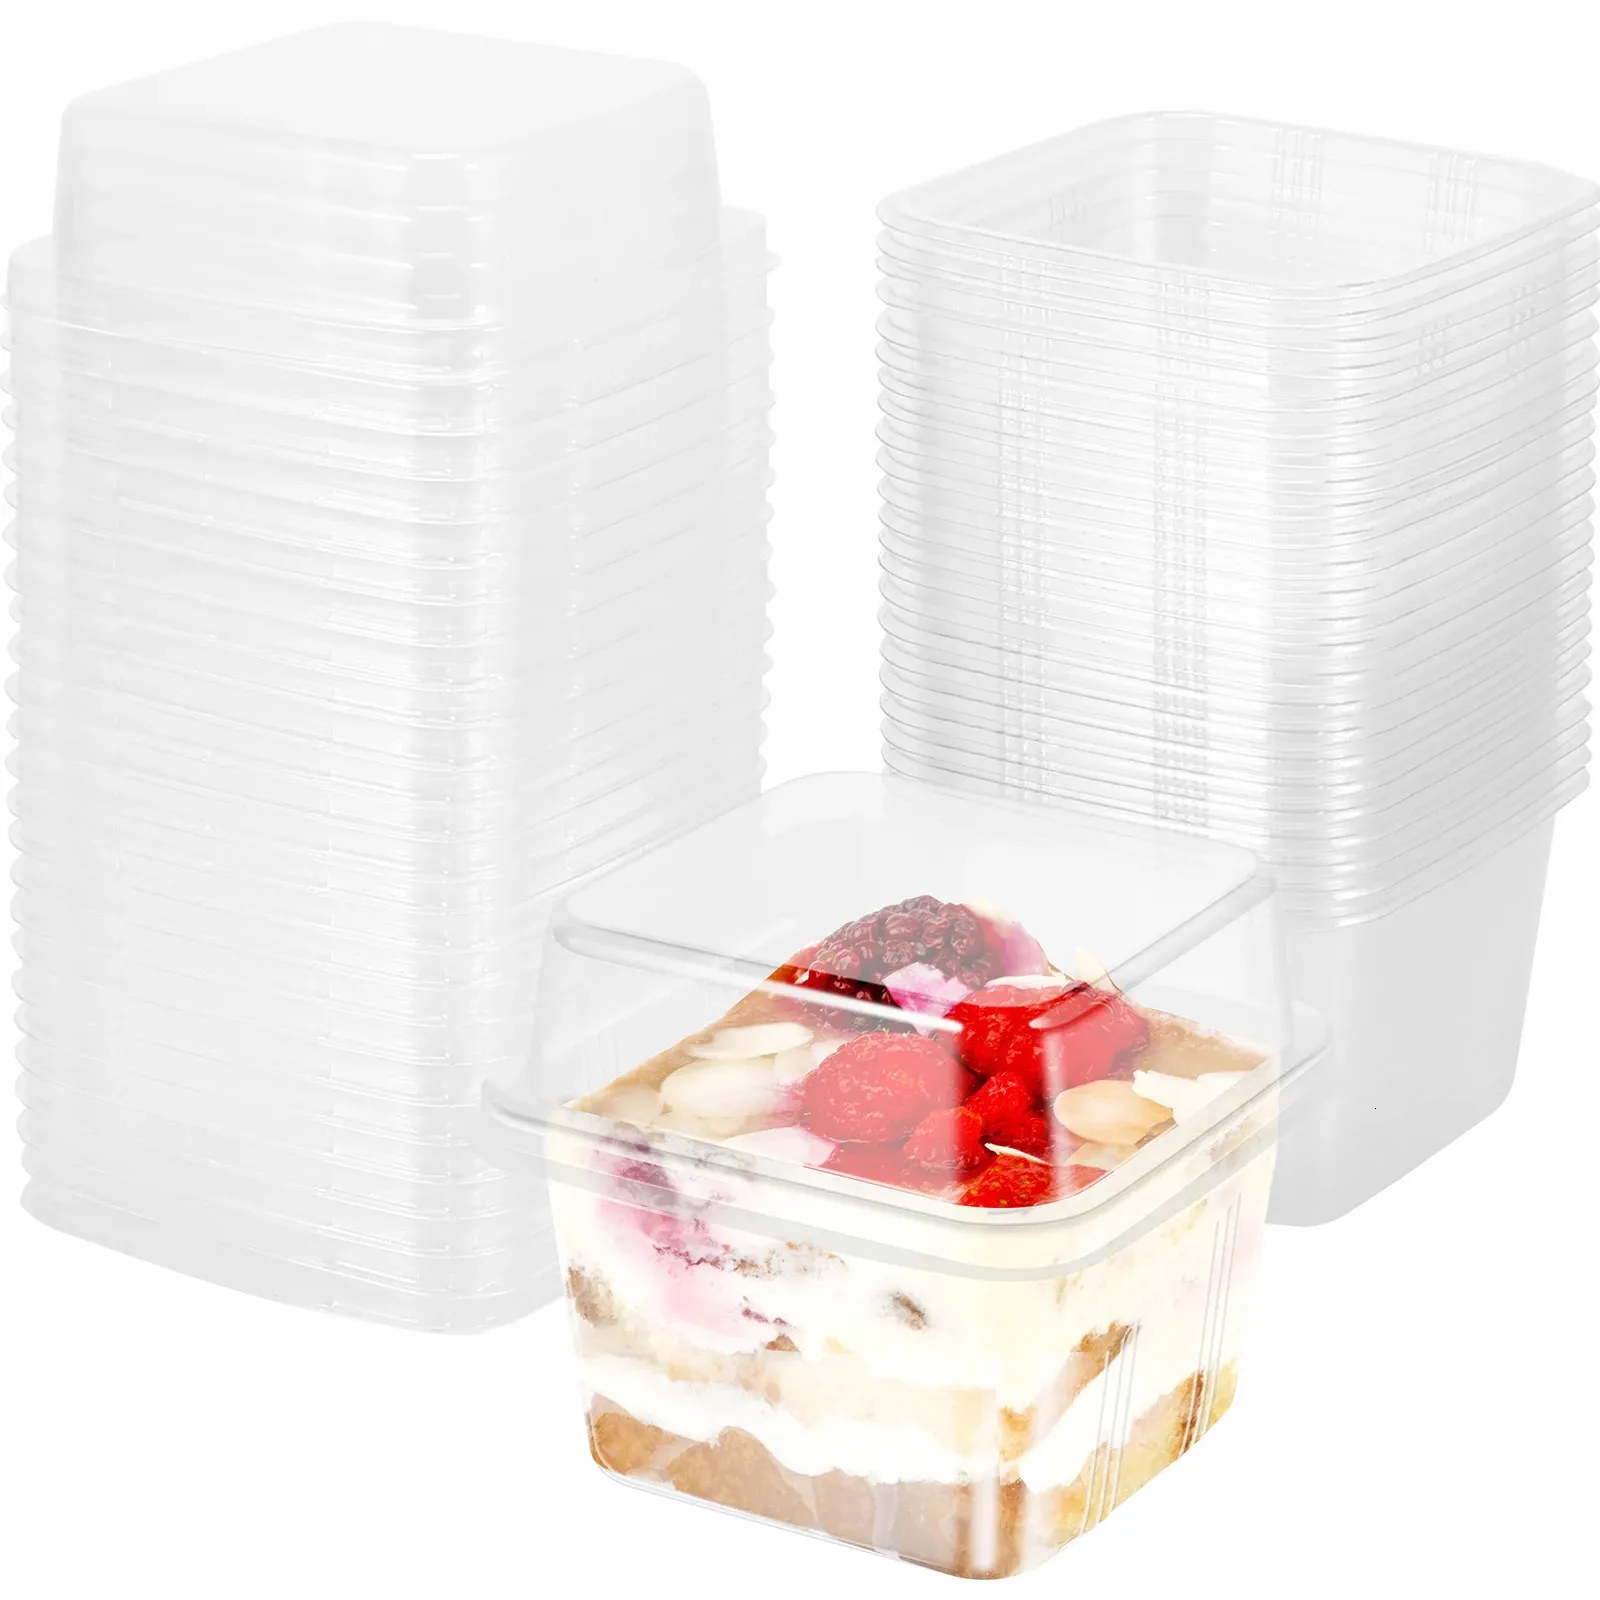 50st Square Cake Boxes Slice Dessert Box Cupcake Container Holder för Muffins Pudding Cake Bakery Wedding Party Supplies 240426